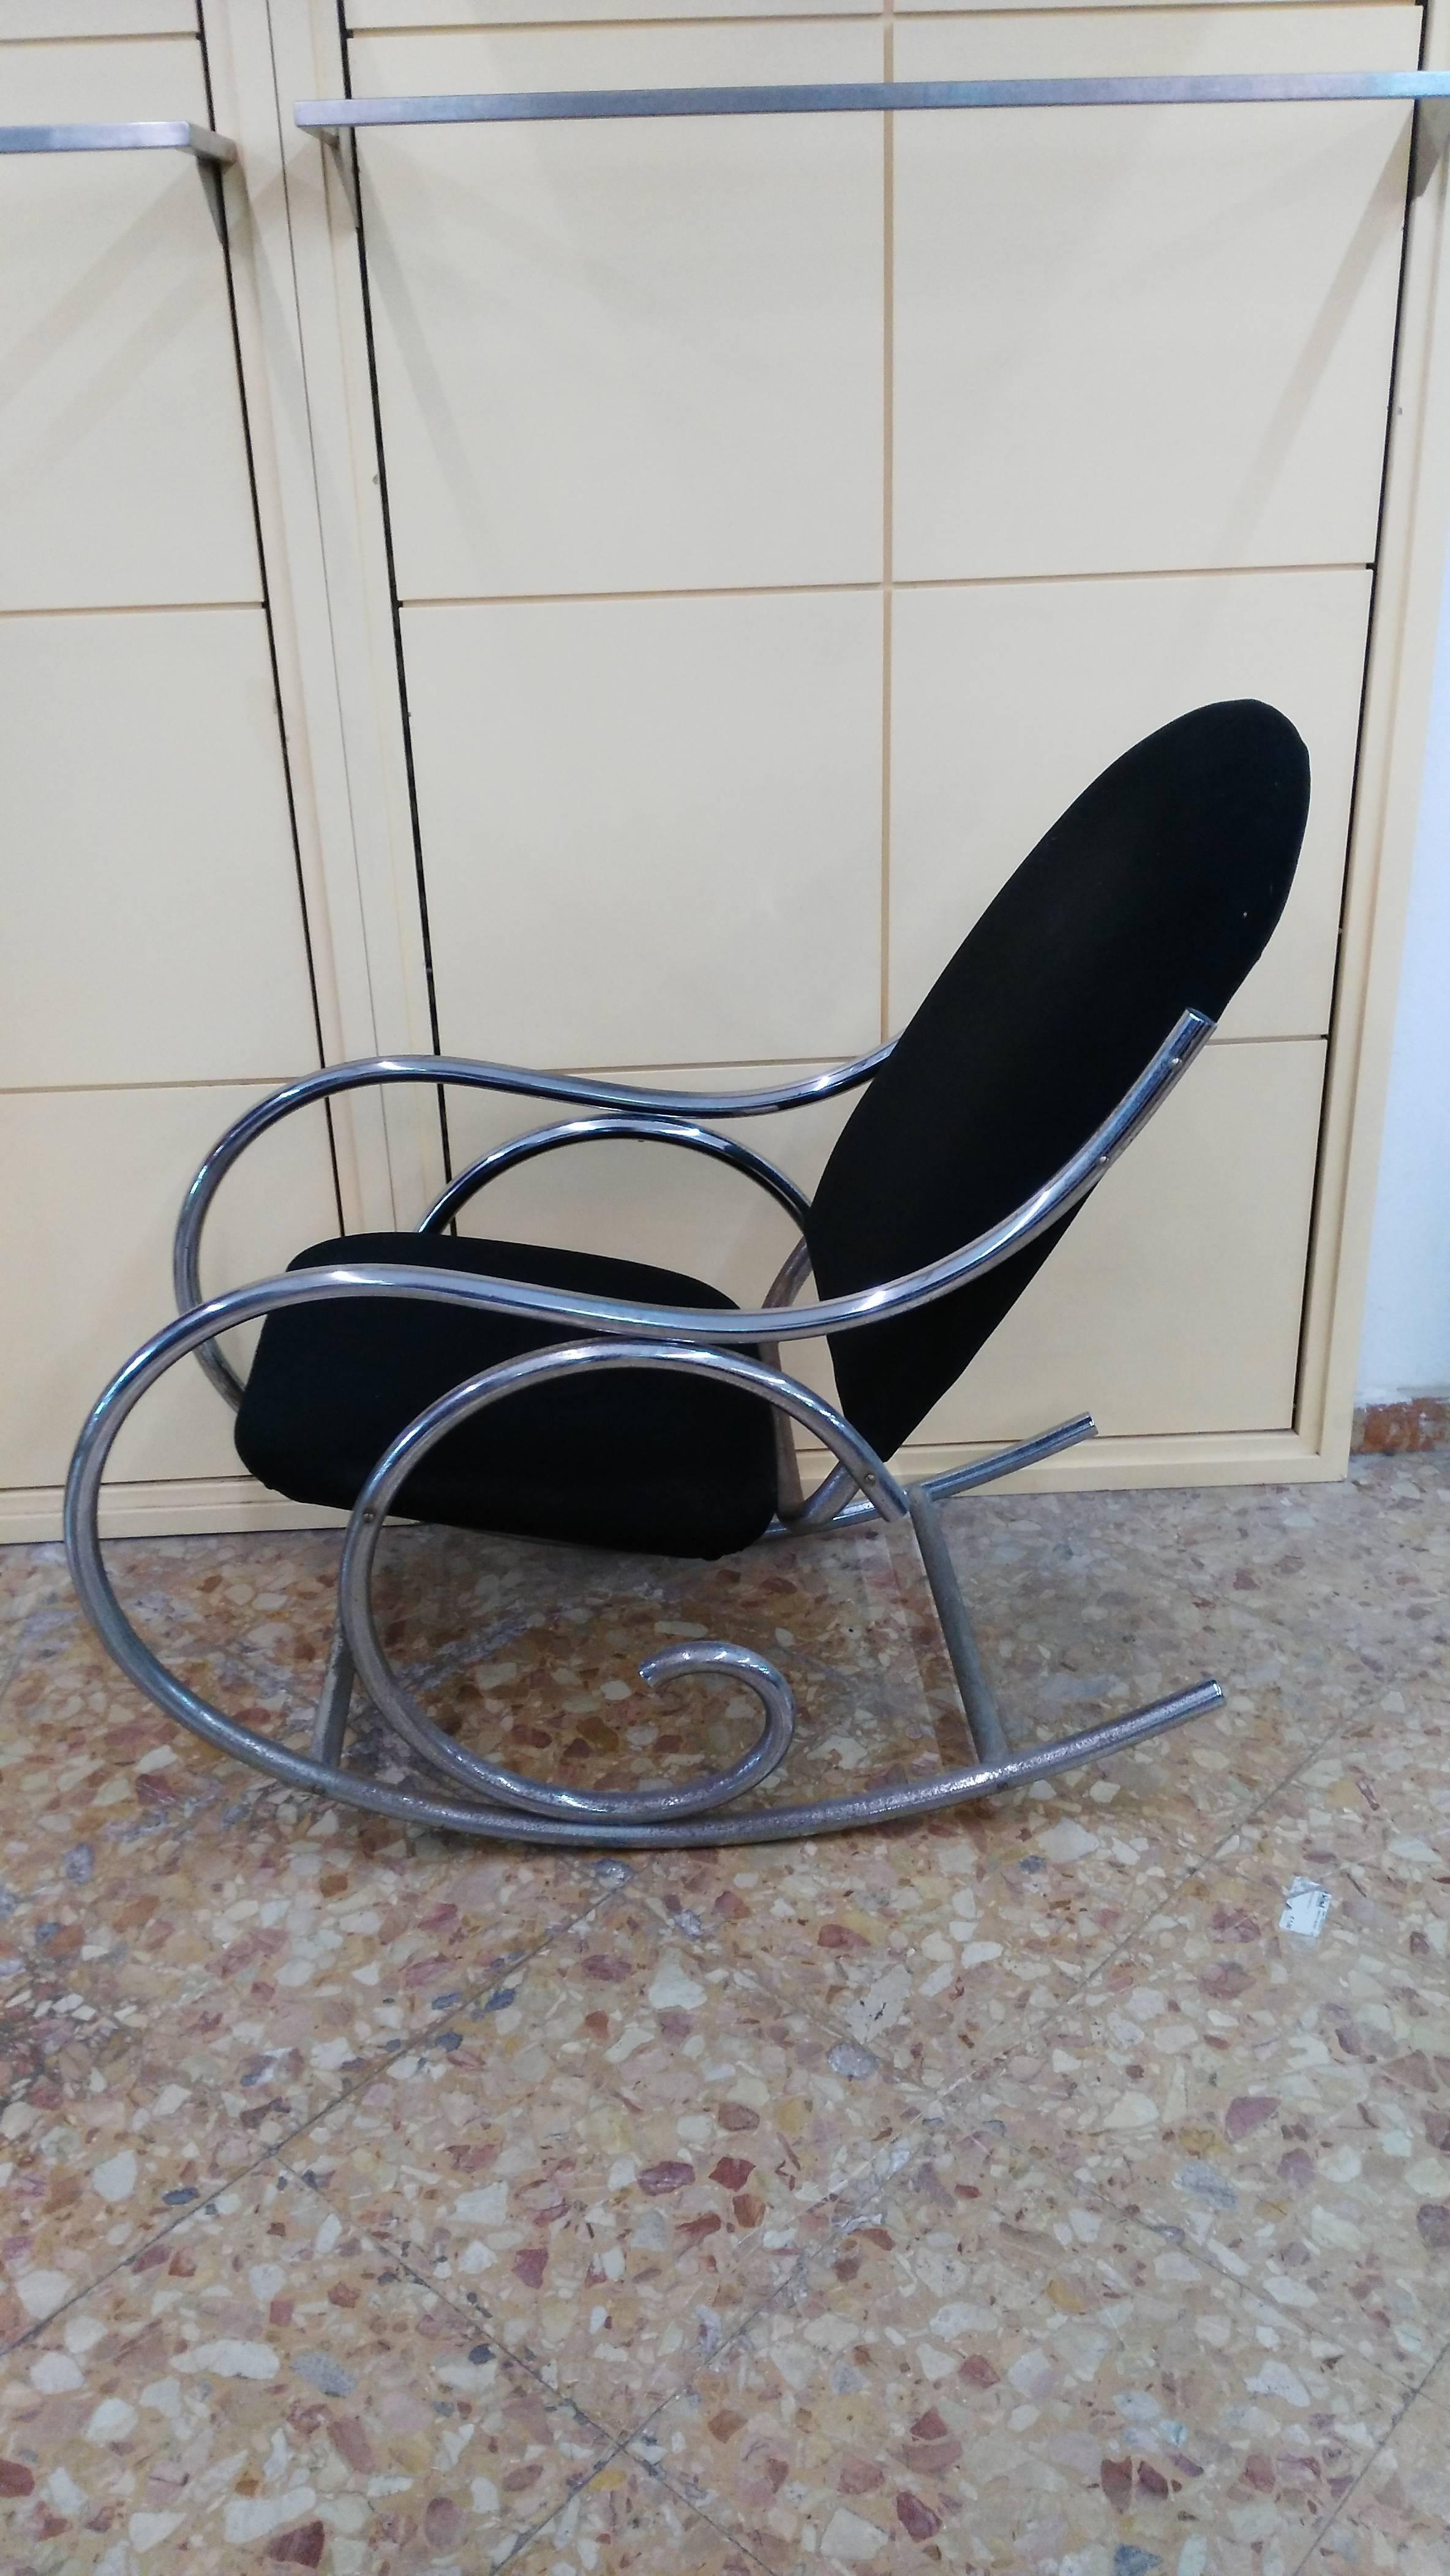 Unobtainable rocking chair
1970s
chromed steel frame with seat and back in black fabric and foam padding.